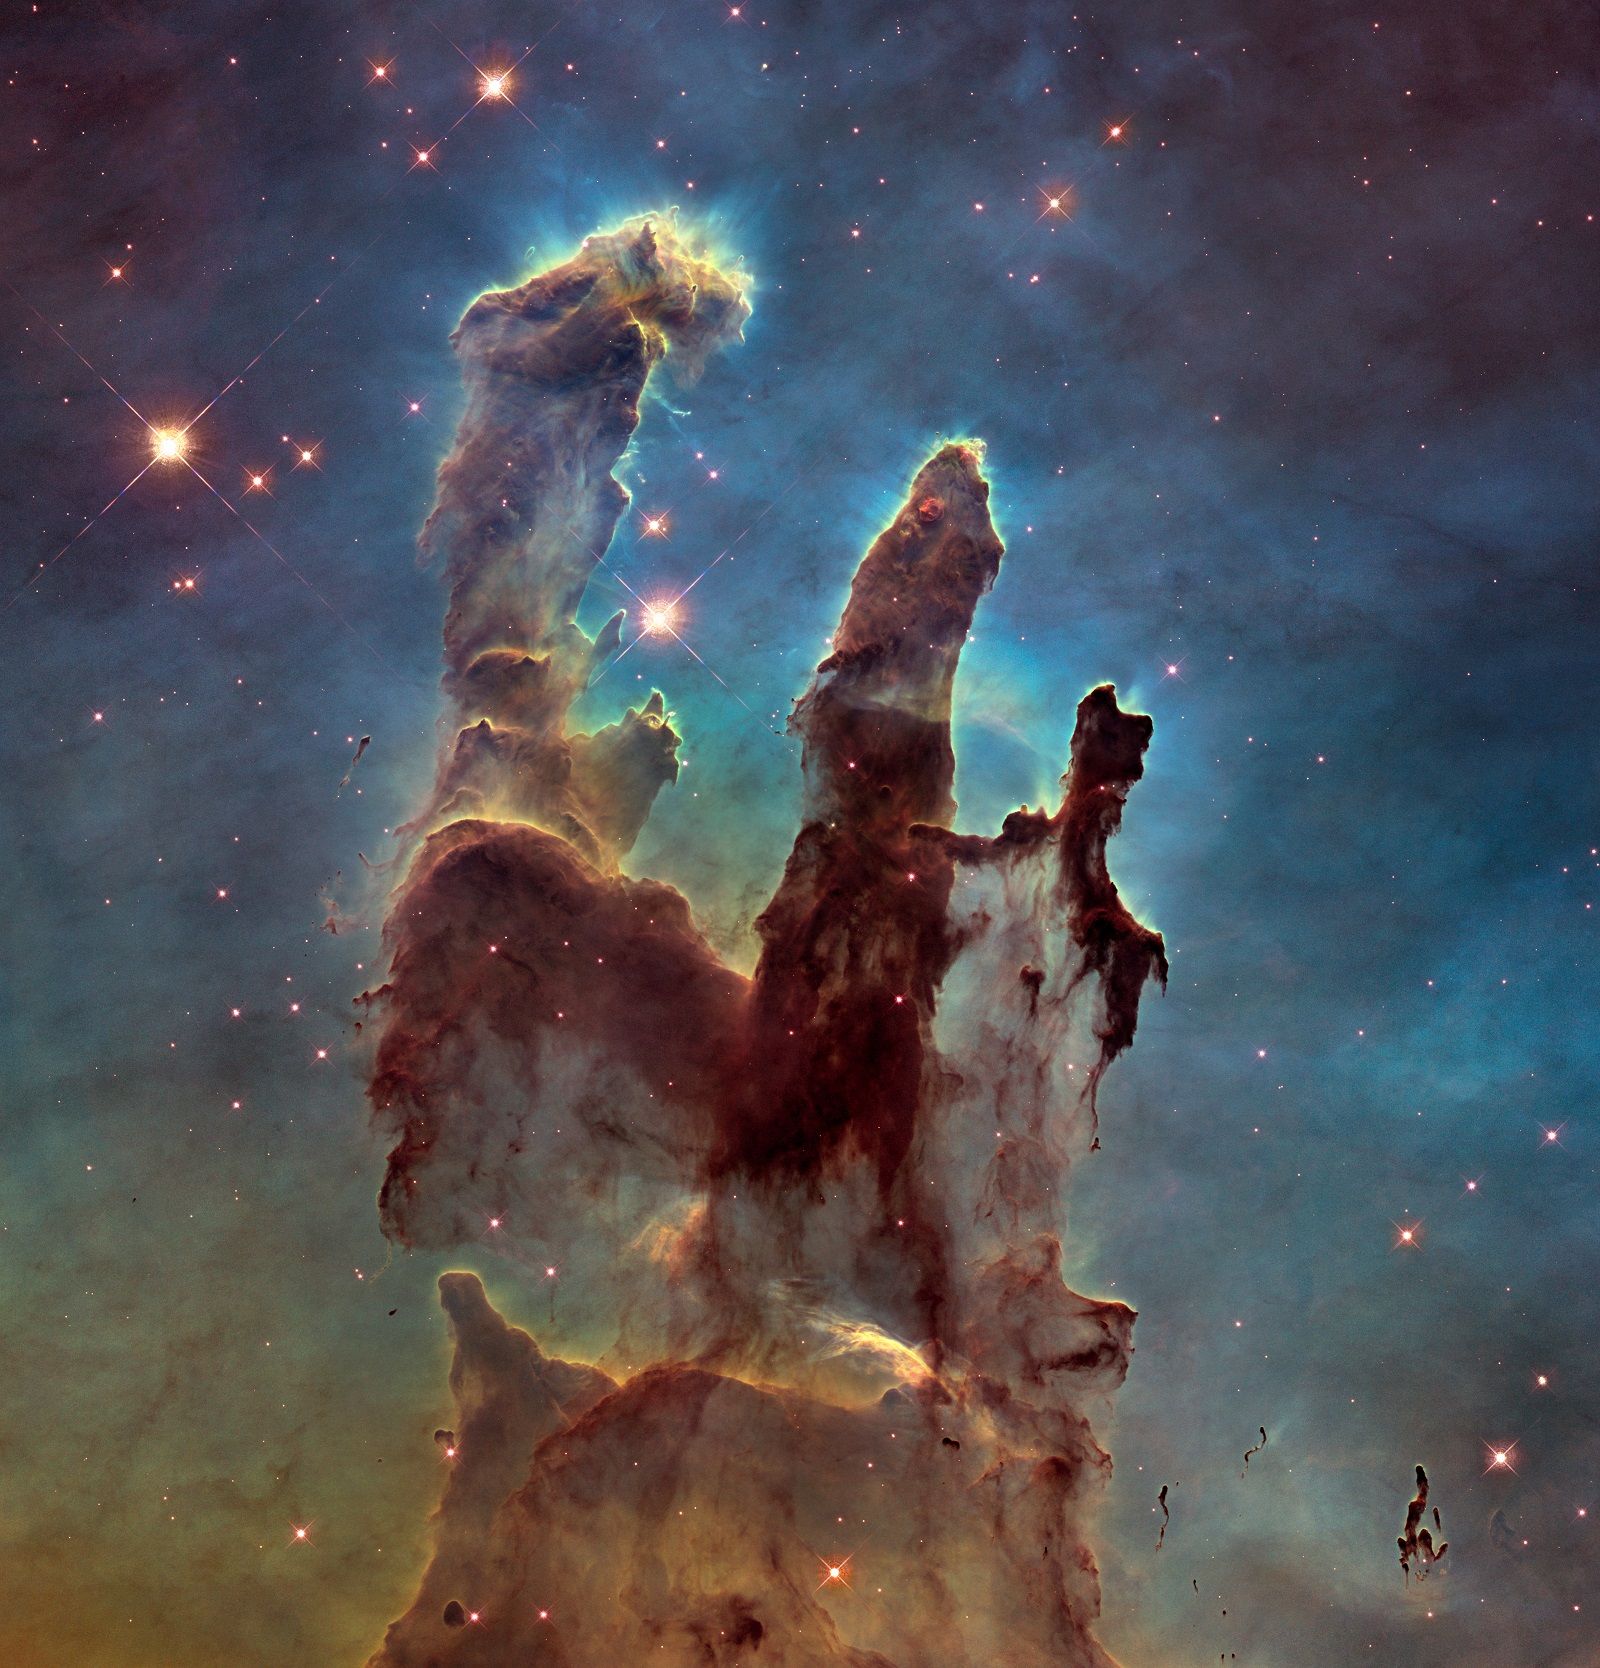 Astounding images from the depths of the Universe courtesy of the Hubble Space Telescope image 5